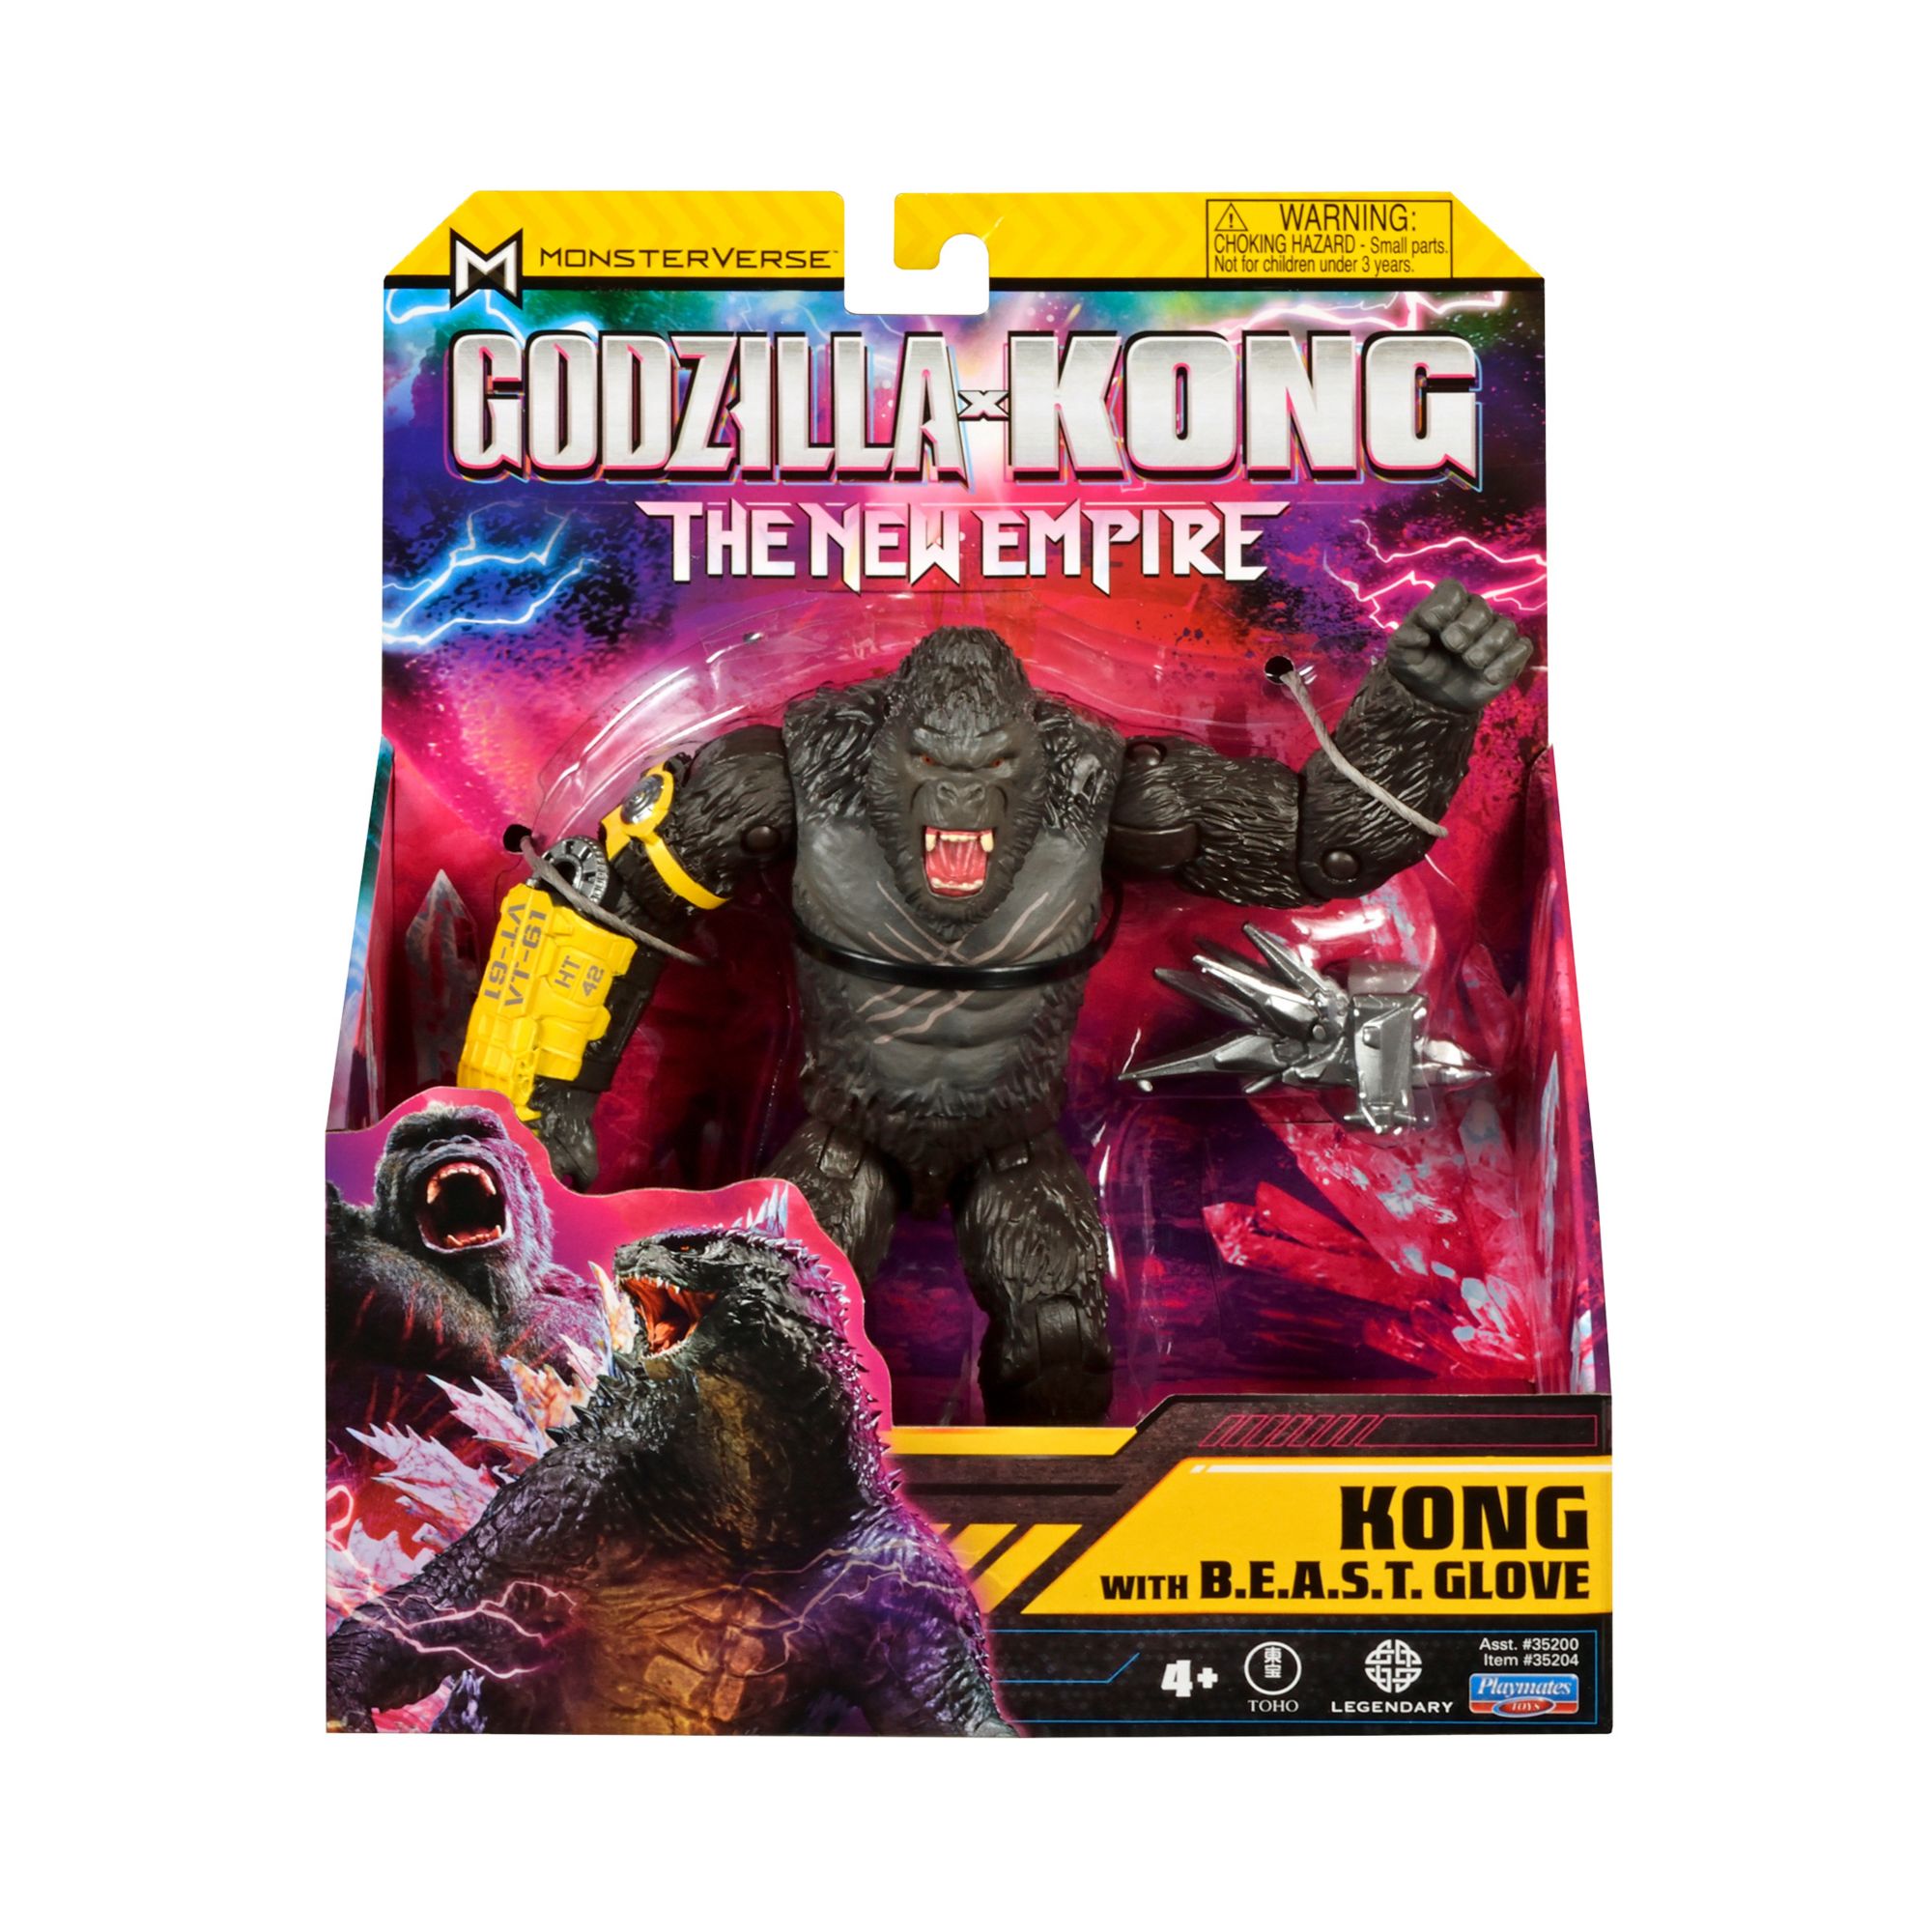 Kong Figure with Power Arm